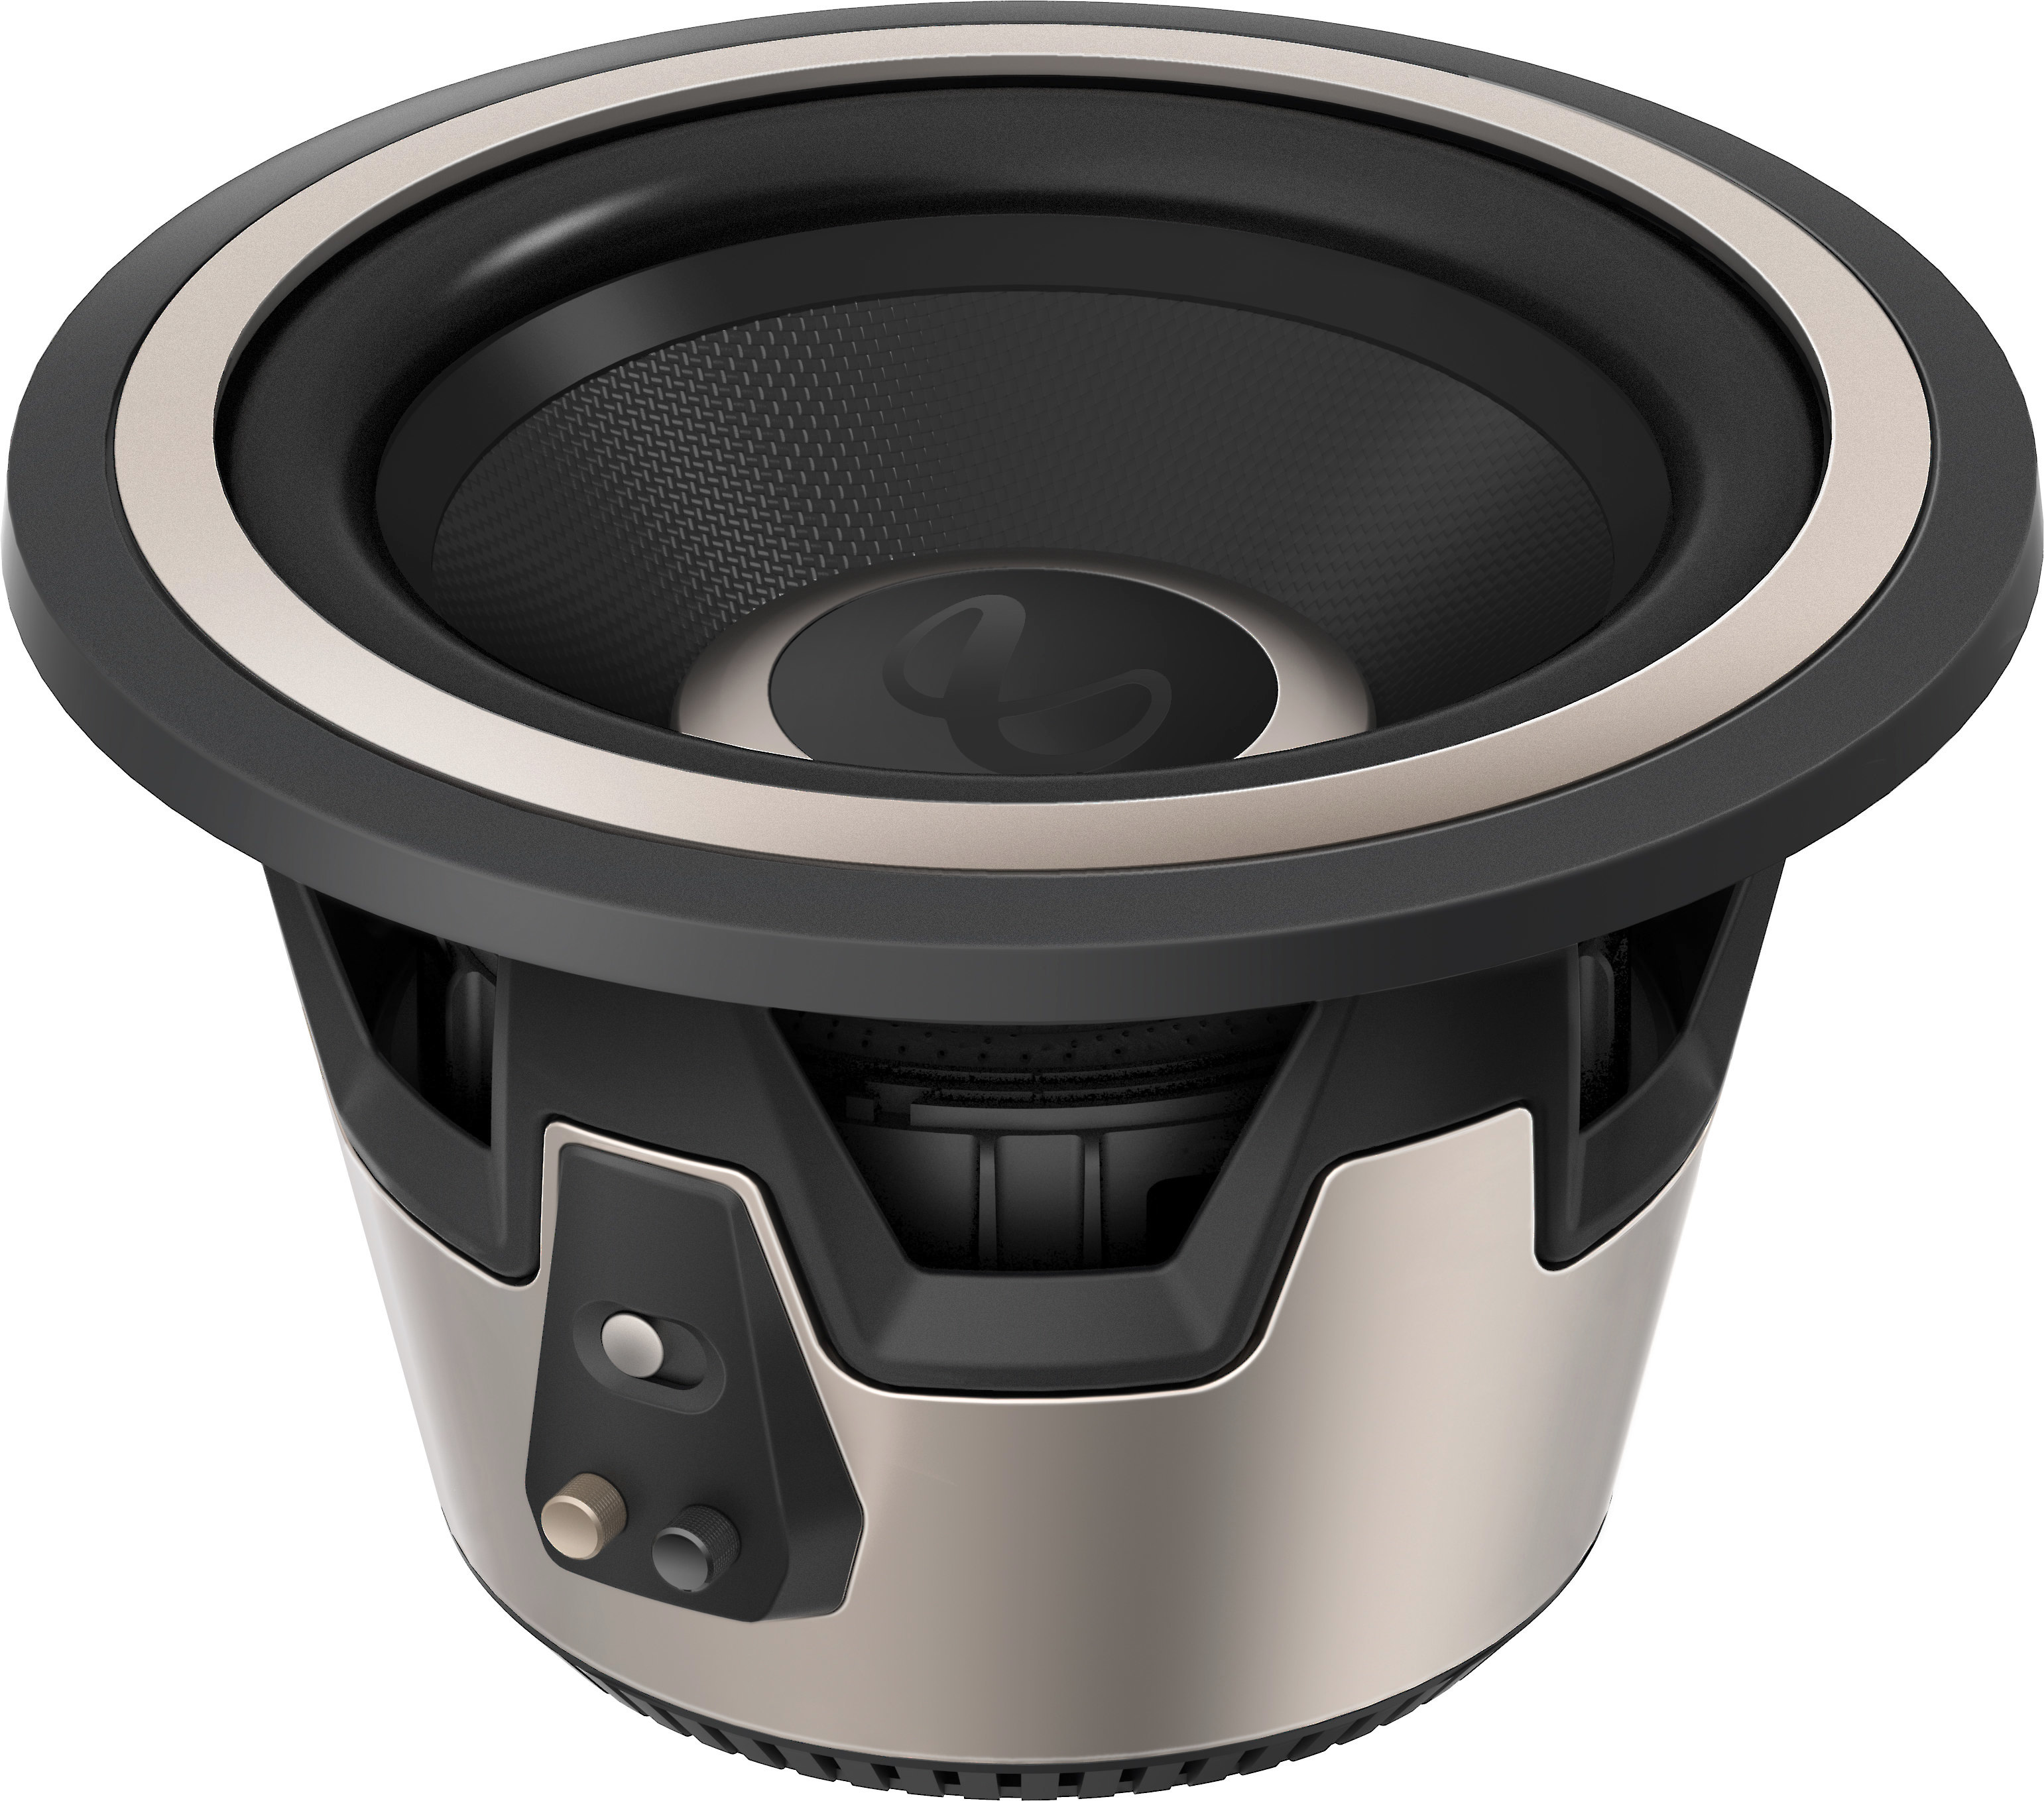 Customer Reviews: Infinity 800W Kappa Series 8" subwoofer with selectable 2- 4-ohm impedance Crutchfield